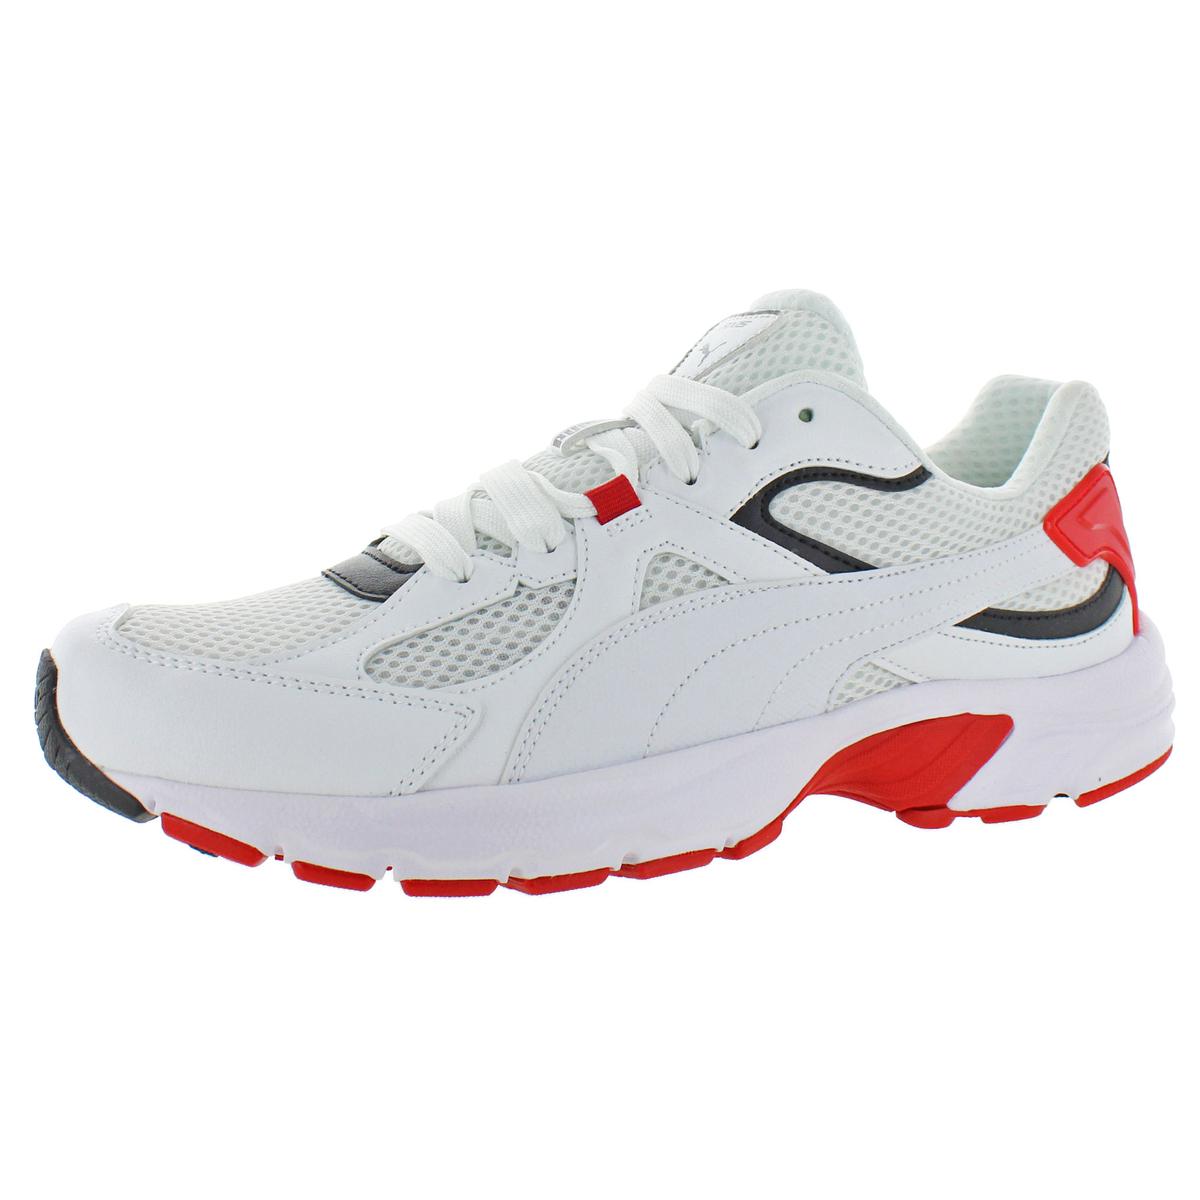 Great oak Mobilize sunlight Puma Axis Plus 90s Mens Padded Insole Softfoam Running Shoes